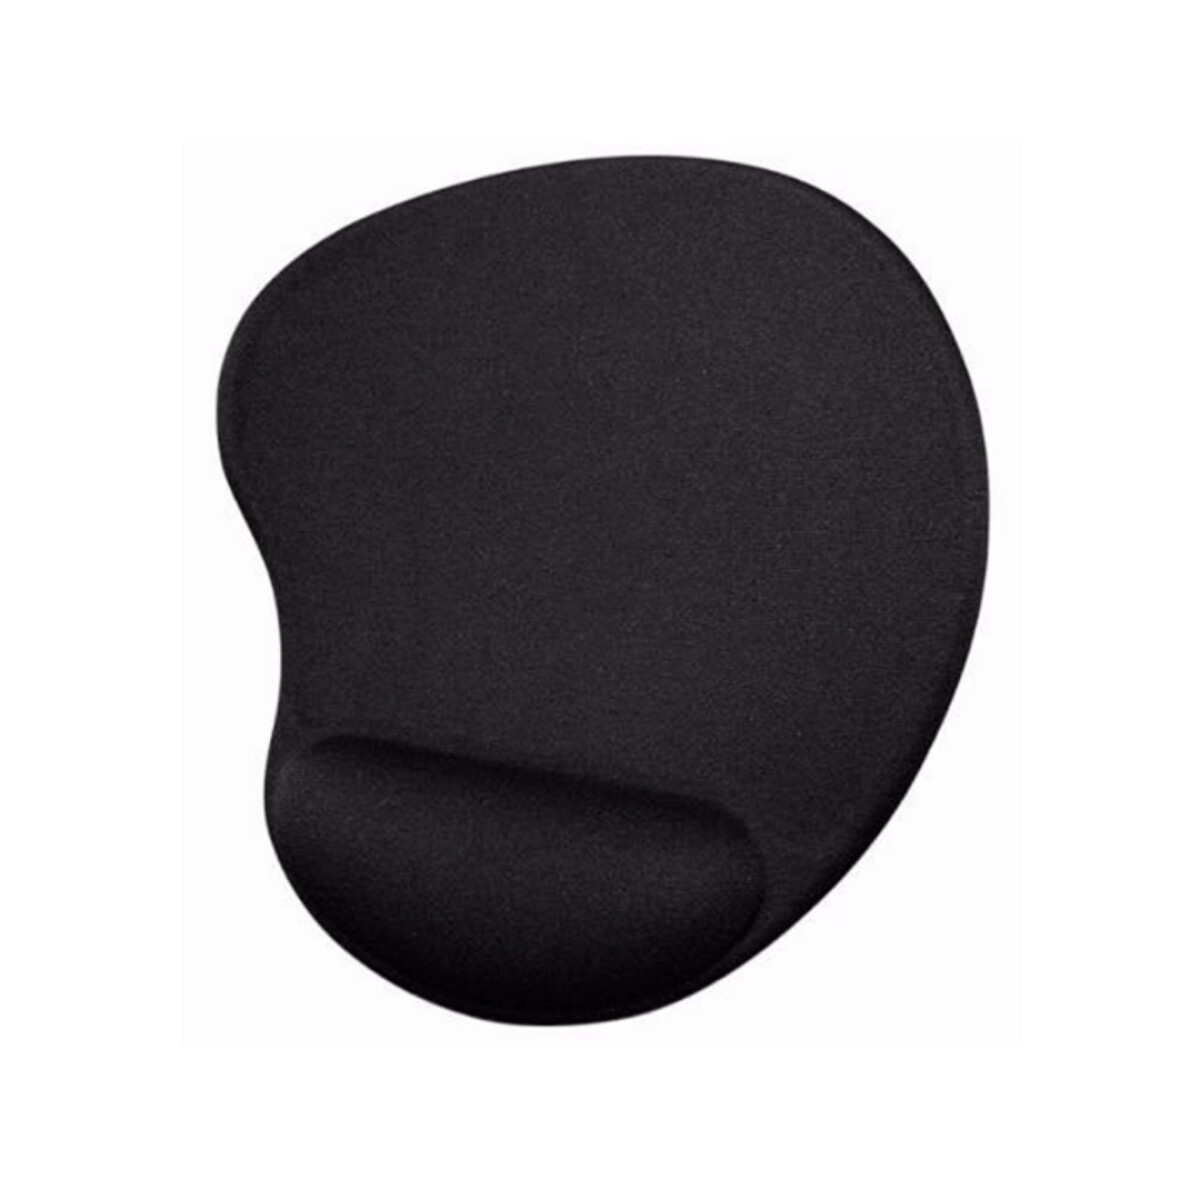 Mouse Pad Con Gel Negro 